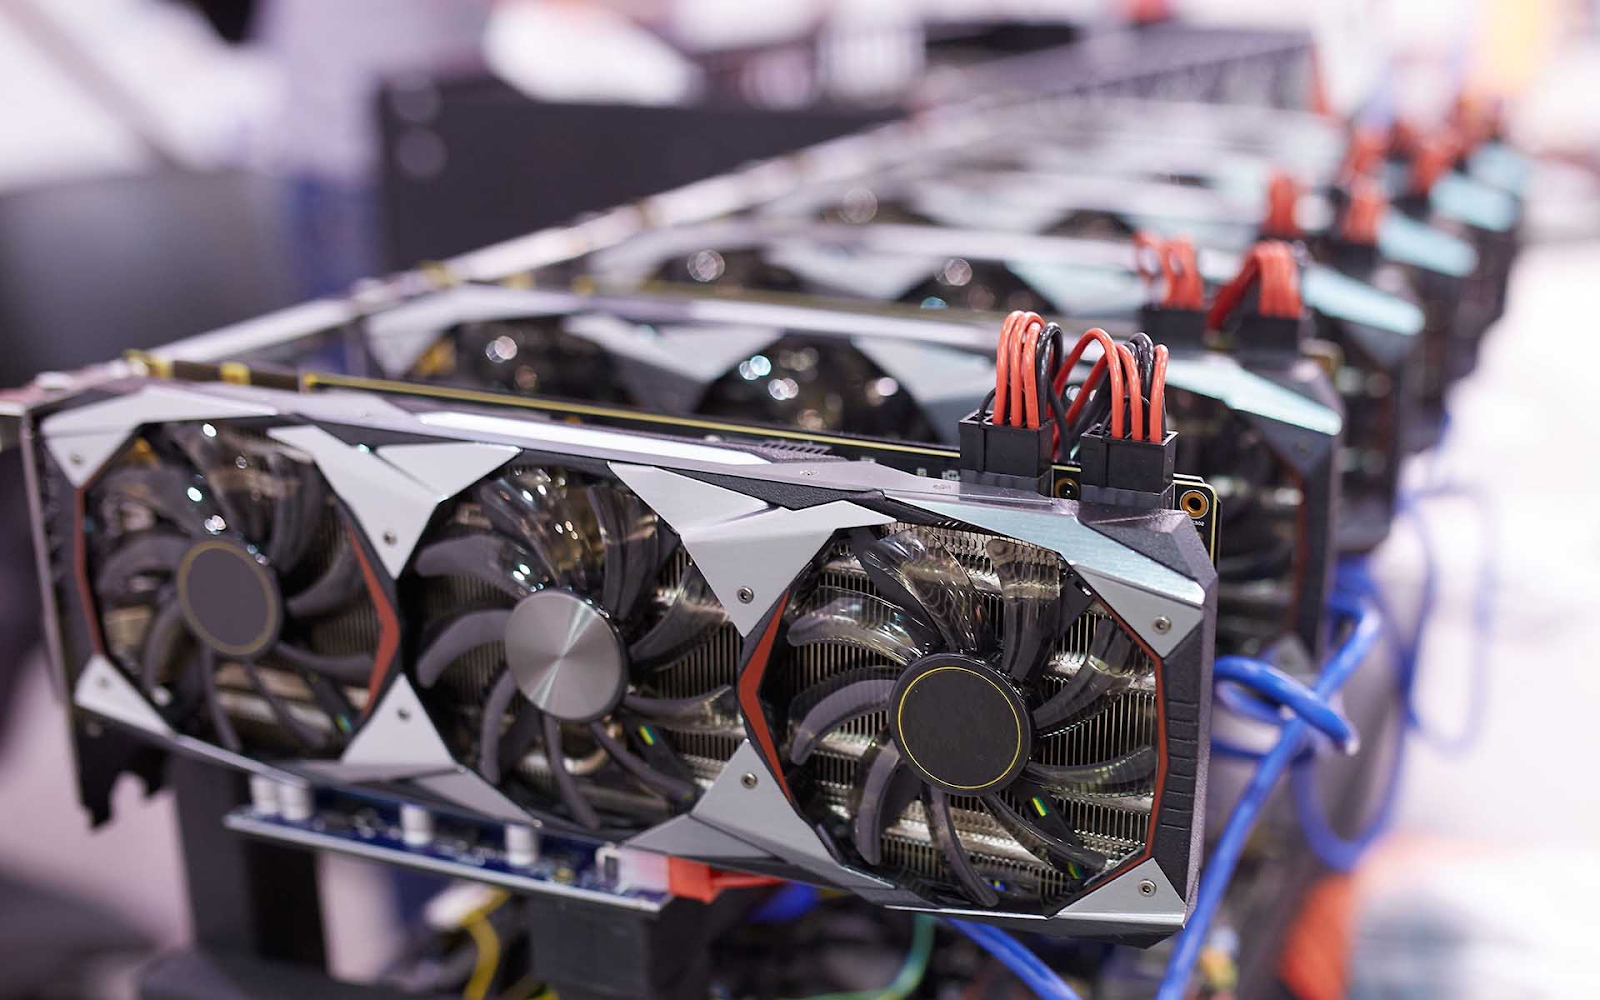 Blog - How to Build a Crypto Mining Rig